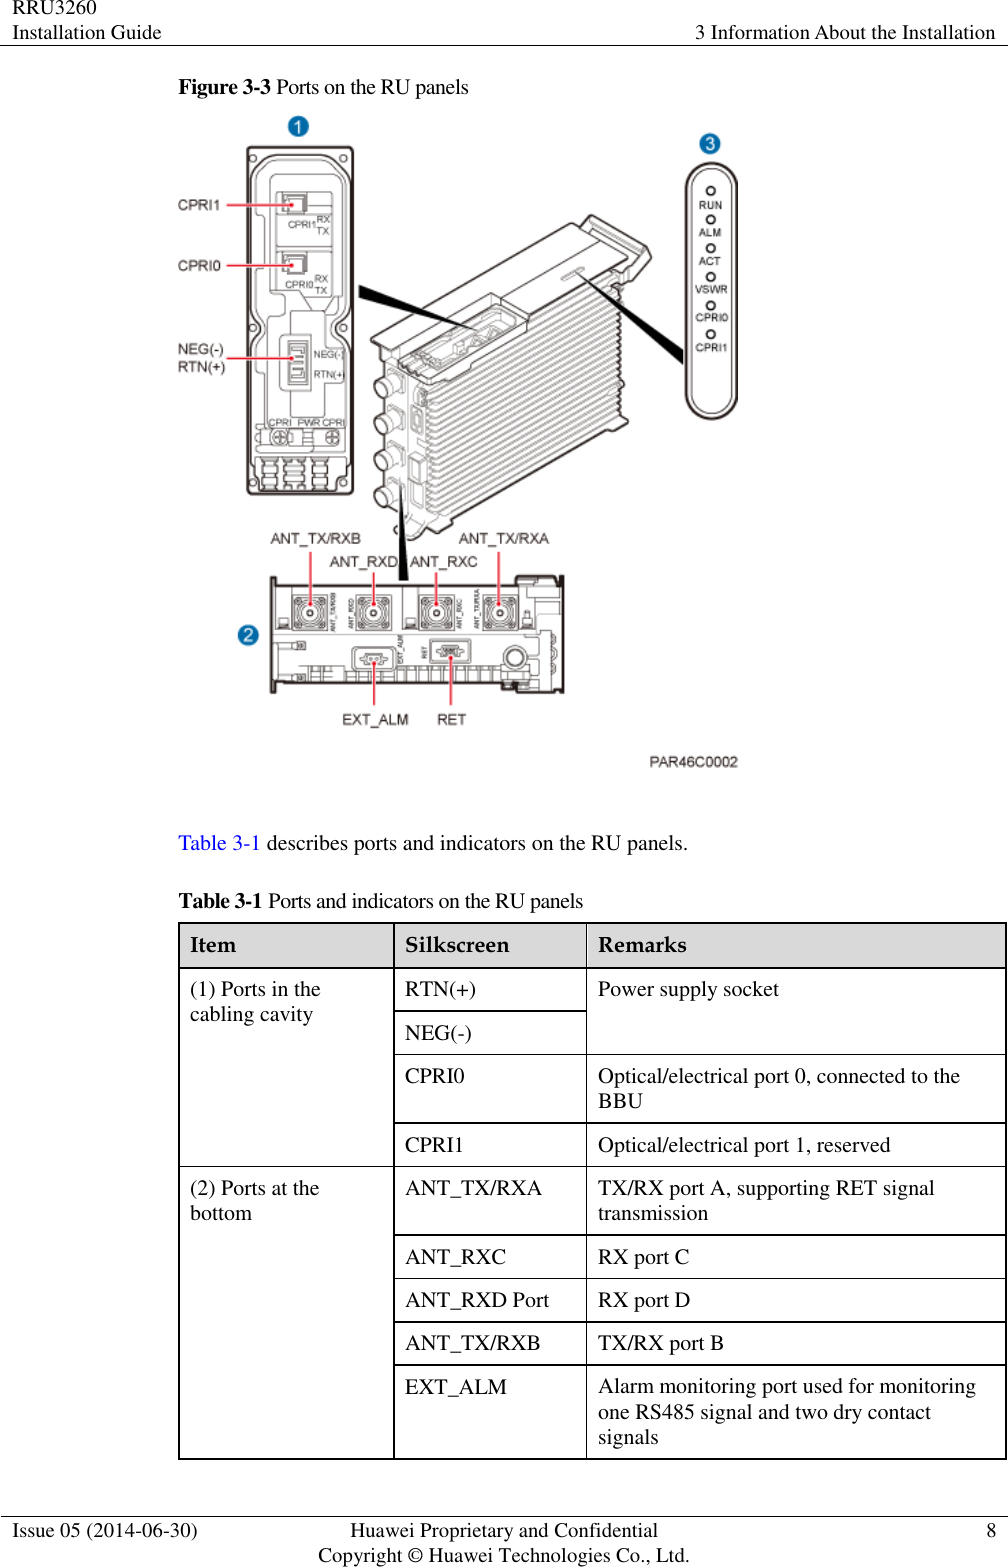 RRU3260 Installation Guide 3 Information About the Installation  Issue 05 (2014-06-30) Huawei Proprietary and Confidential                                     Copyright © Huawei Technologies Co., Ltd. 8  Figure 3-3 Ports on the RU panels   Table 3-1 describes ports and indicators on the RU panels. Table 3-1 Ports and indicators on the RU panels Item Silkscreen Remarks (1) Ports in the cabling cavity RTN(+) Power supply socket NEG(-) CPRI0 Optical/electrical port 0, connected to the BBU CPRI1 Optical/electrical port 1, reserved (2) Ports at the bottom ANT_TX/RXA TX/RX port A, supporting RET signal transmission ANT_RXC RX port C ANT_RXD Port RX port D ANT_TX/RXB TX/RX port B EXT_ALM Alarm monitoring port used for monitoring one RS485 signal and two dry contact signals 